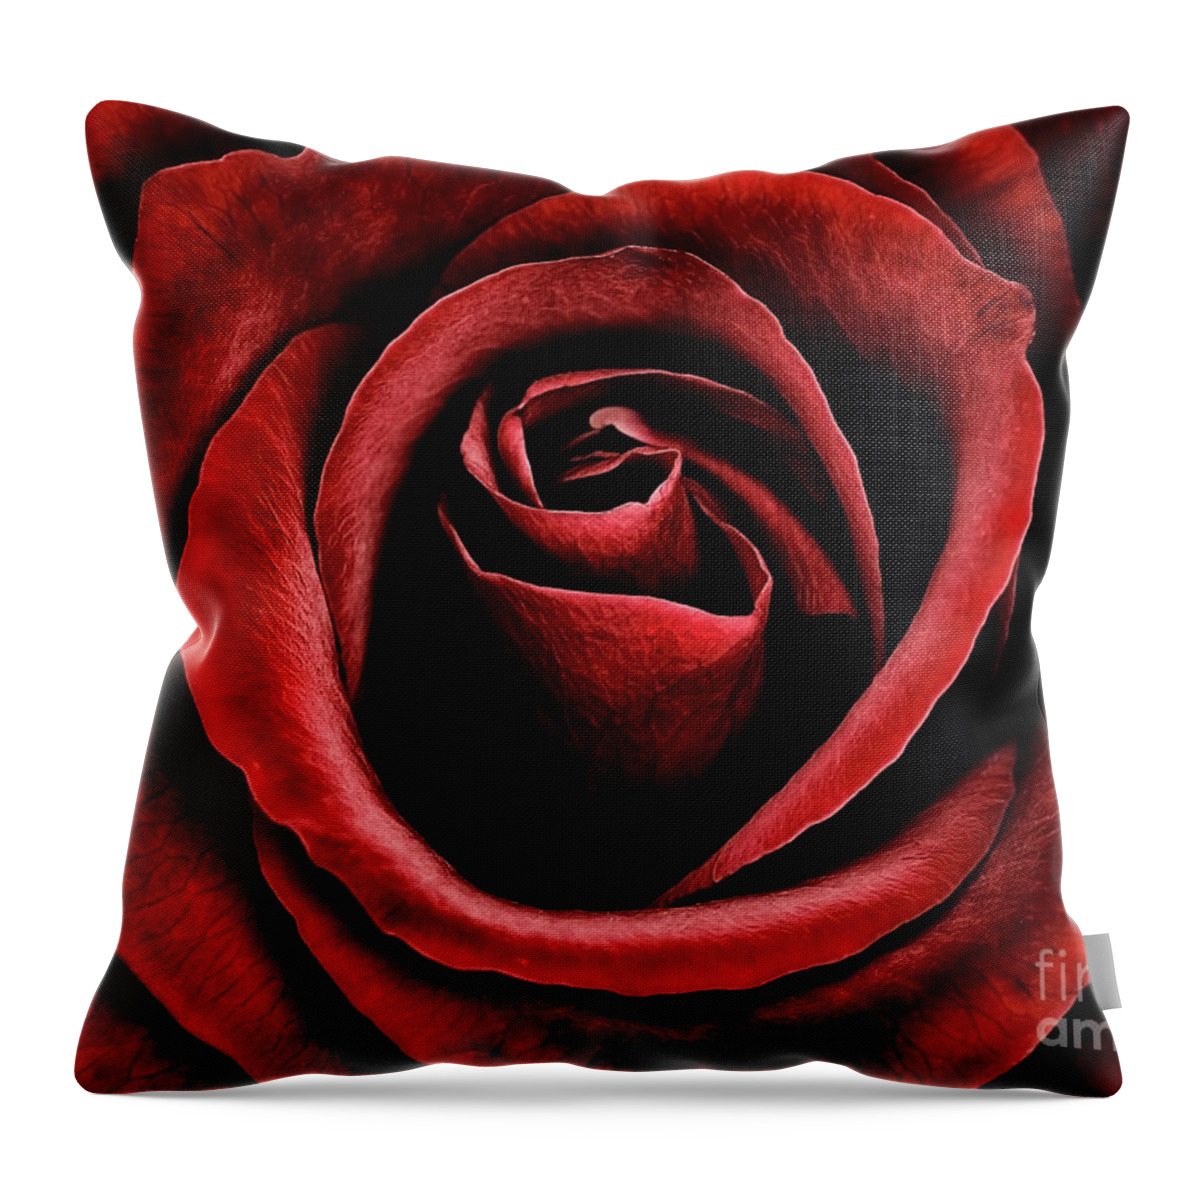 Velvet Red Rose Flower Beauty Beautiful Delightful Shining From Dark Proud Black Fantastic Vivid Vibrant Colour Colourful Color Colorful Poetic Magical Macro Impressive Impression Contrast Floral Still-life Attractive  Throw Pillow featuring the photograph Velvet Red Rose by Tatiana Bogracheva